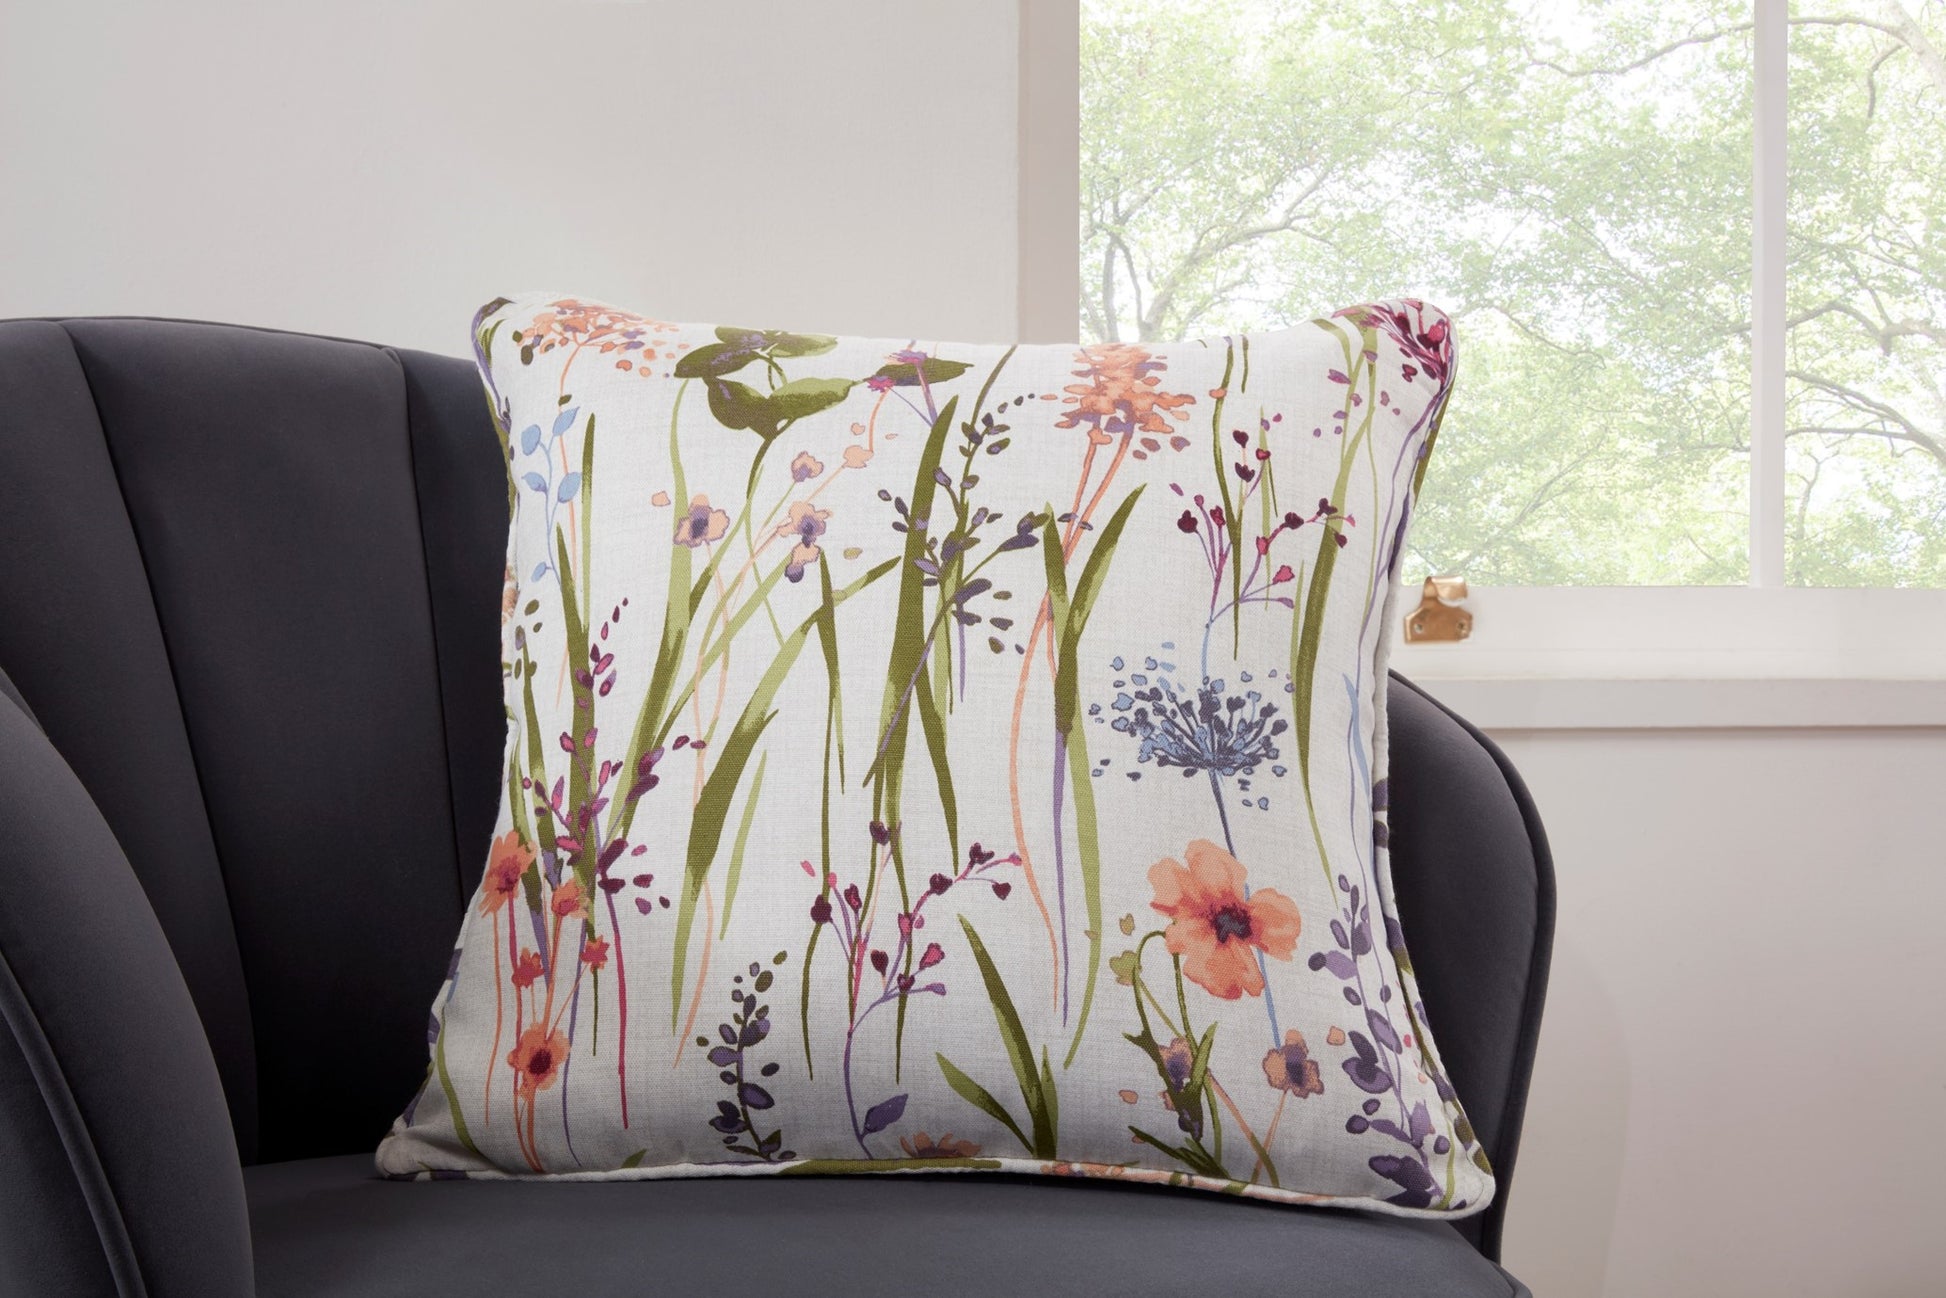 Floral meadow cushion with a polyester cushion pad.